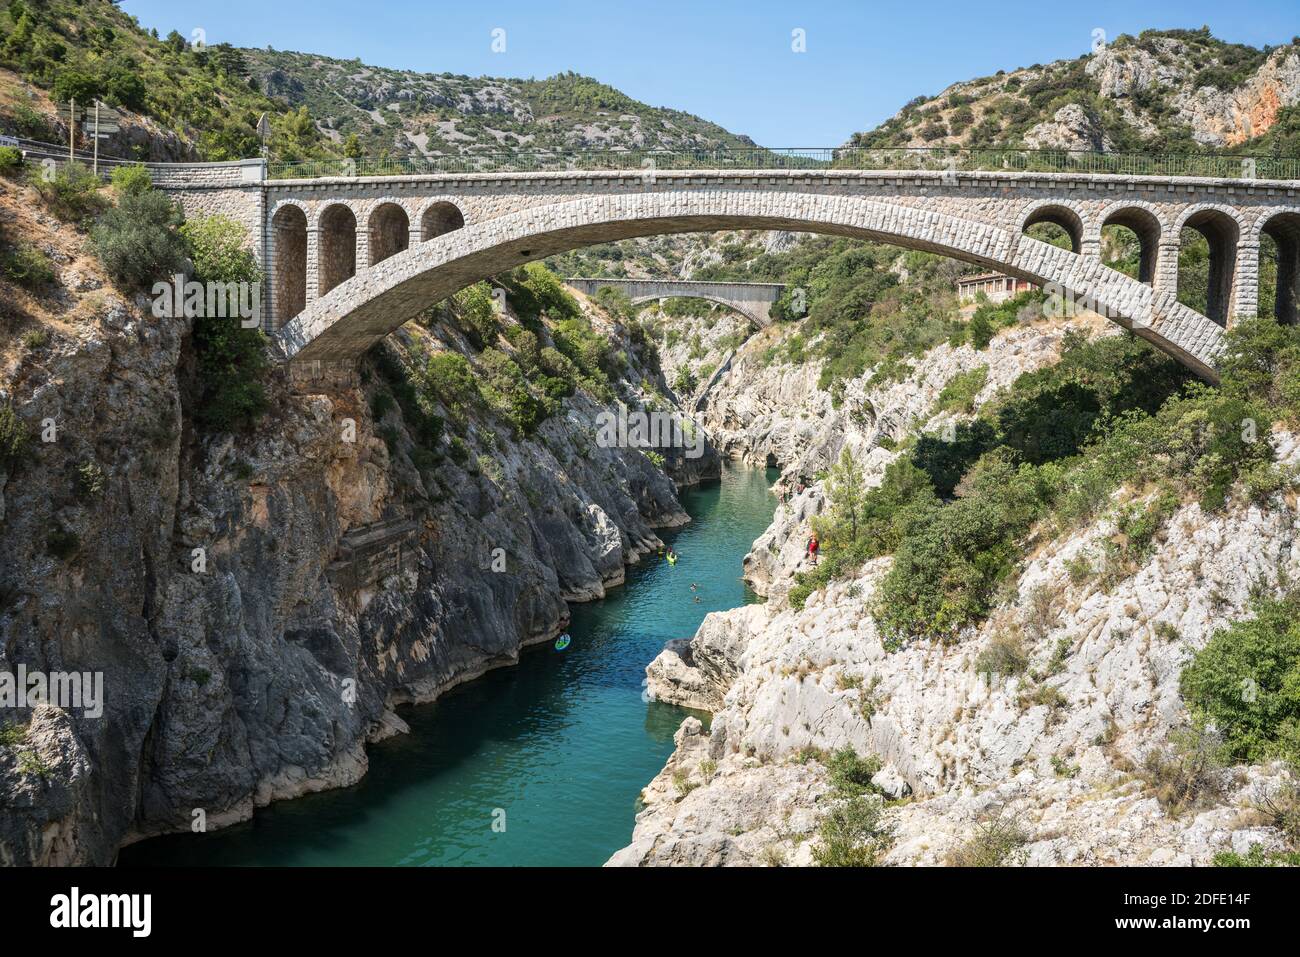 Local people swimming in the Hérault River below the Pont du Diable, France, Europe. Stock Photo